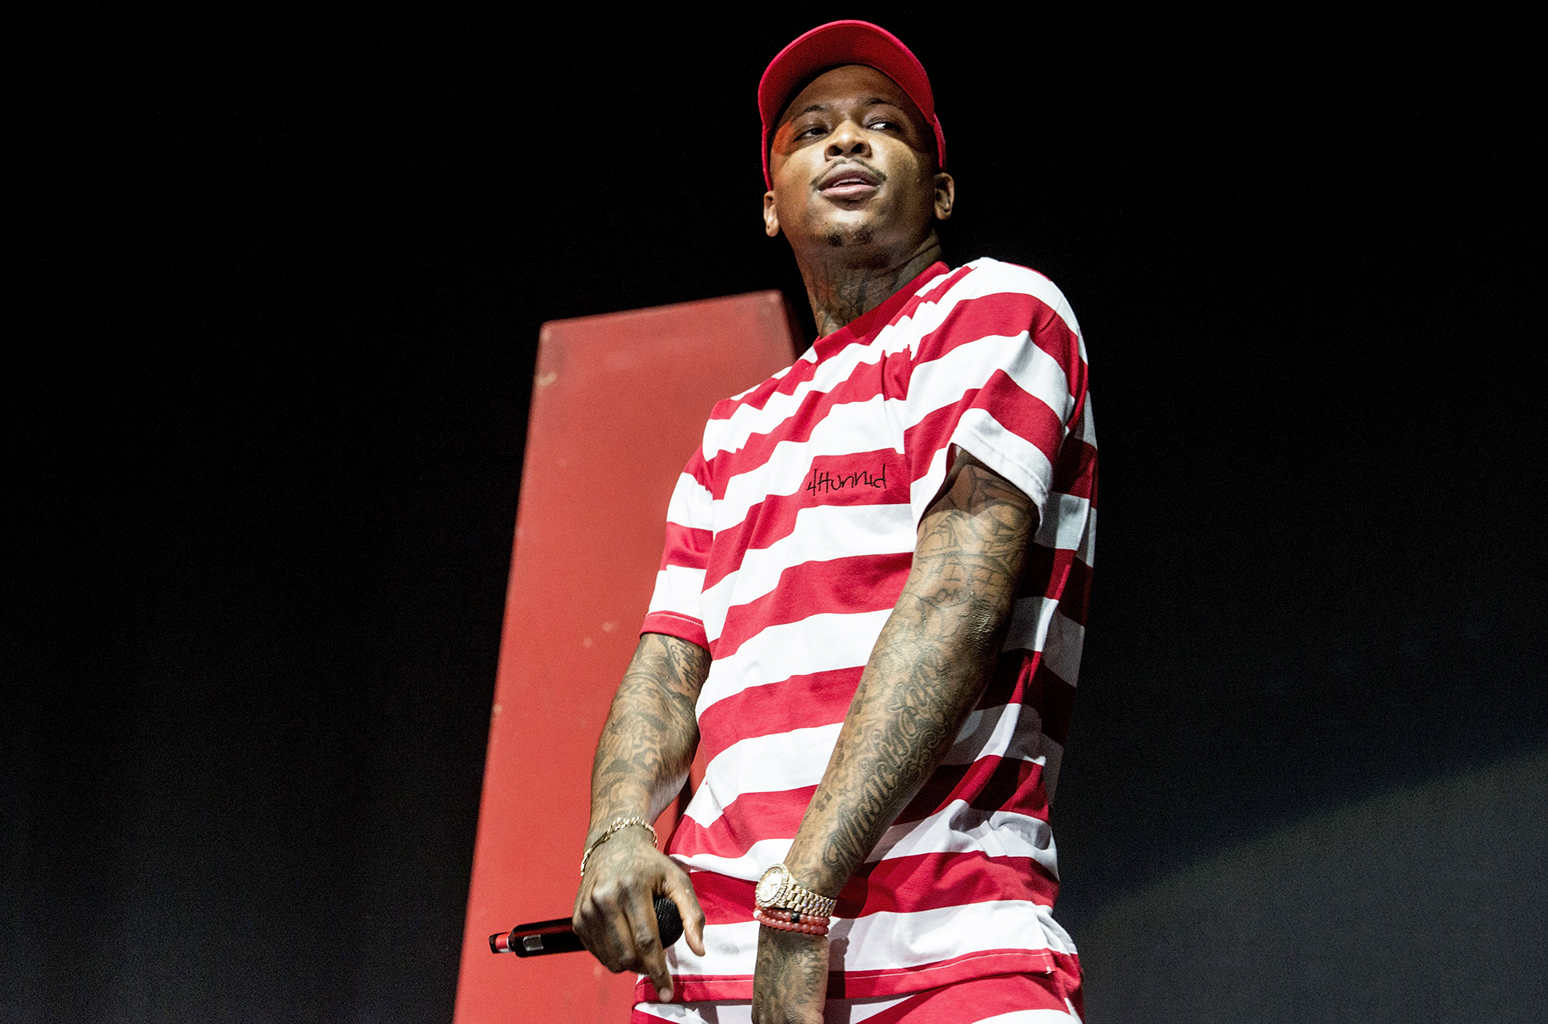 YG is Offering to Perform “F.D.T.” at Trump’s Inauguration at a Price